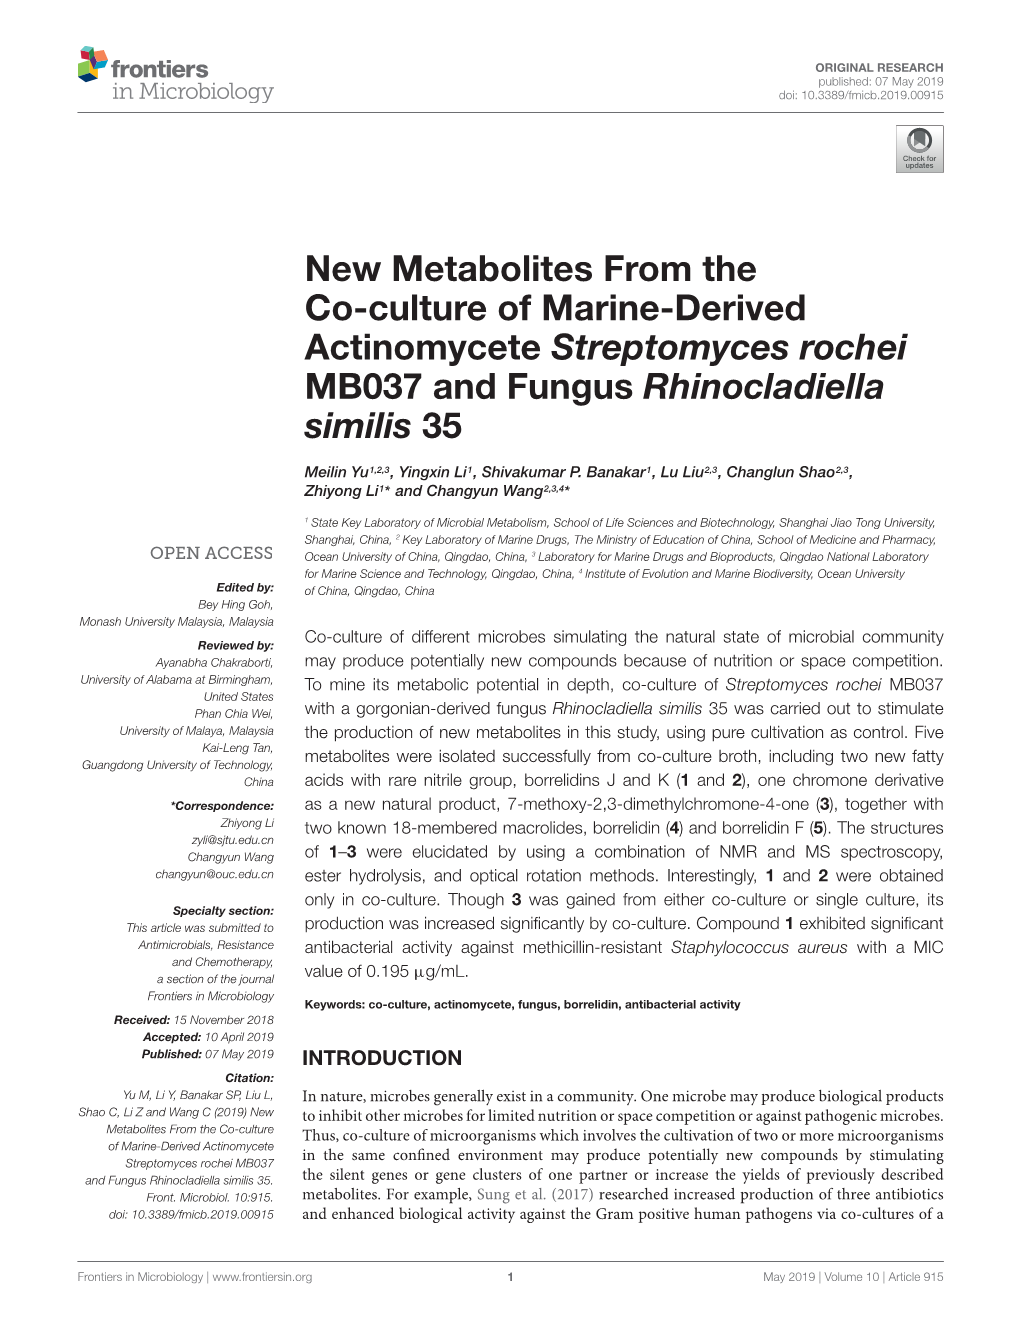 New Metabolites from the Co-Culture of Marine-Derived Actinomycete Streptomyces Rochei MB037 and Fungus Rhinocladiella Similis 35